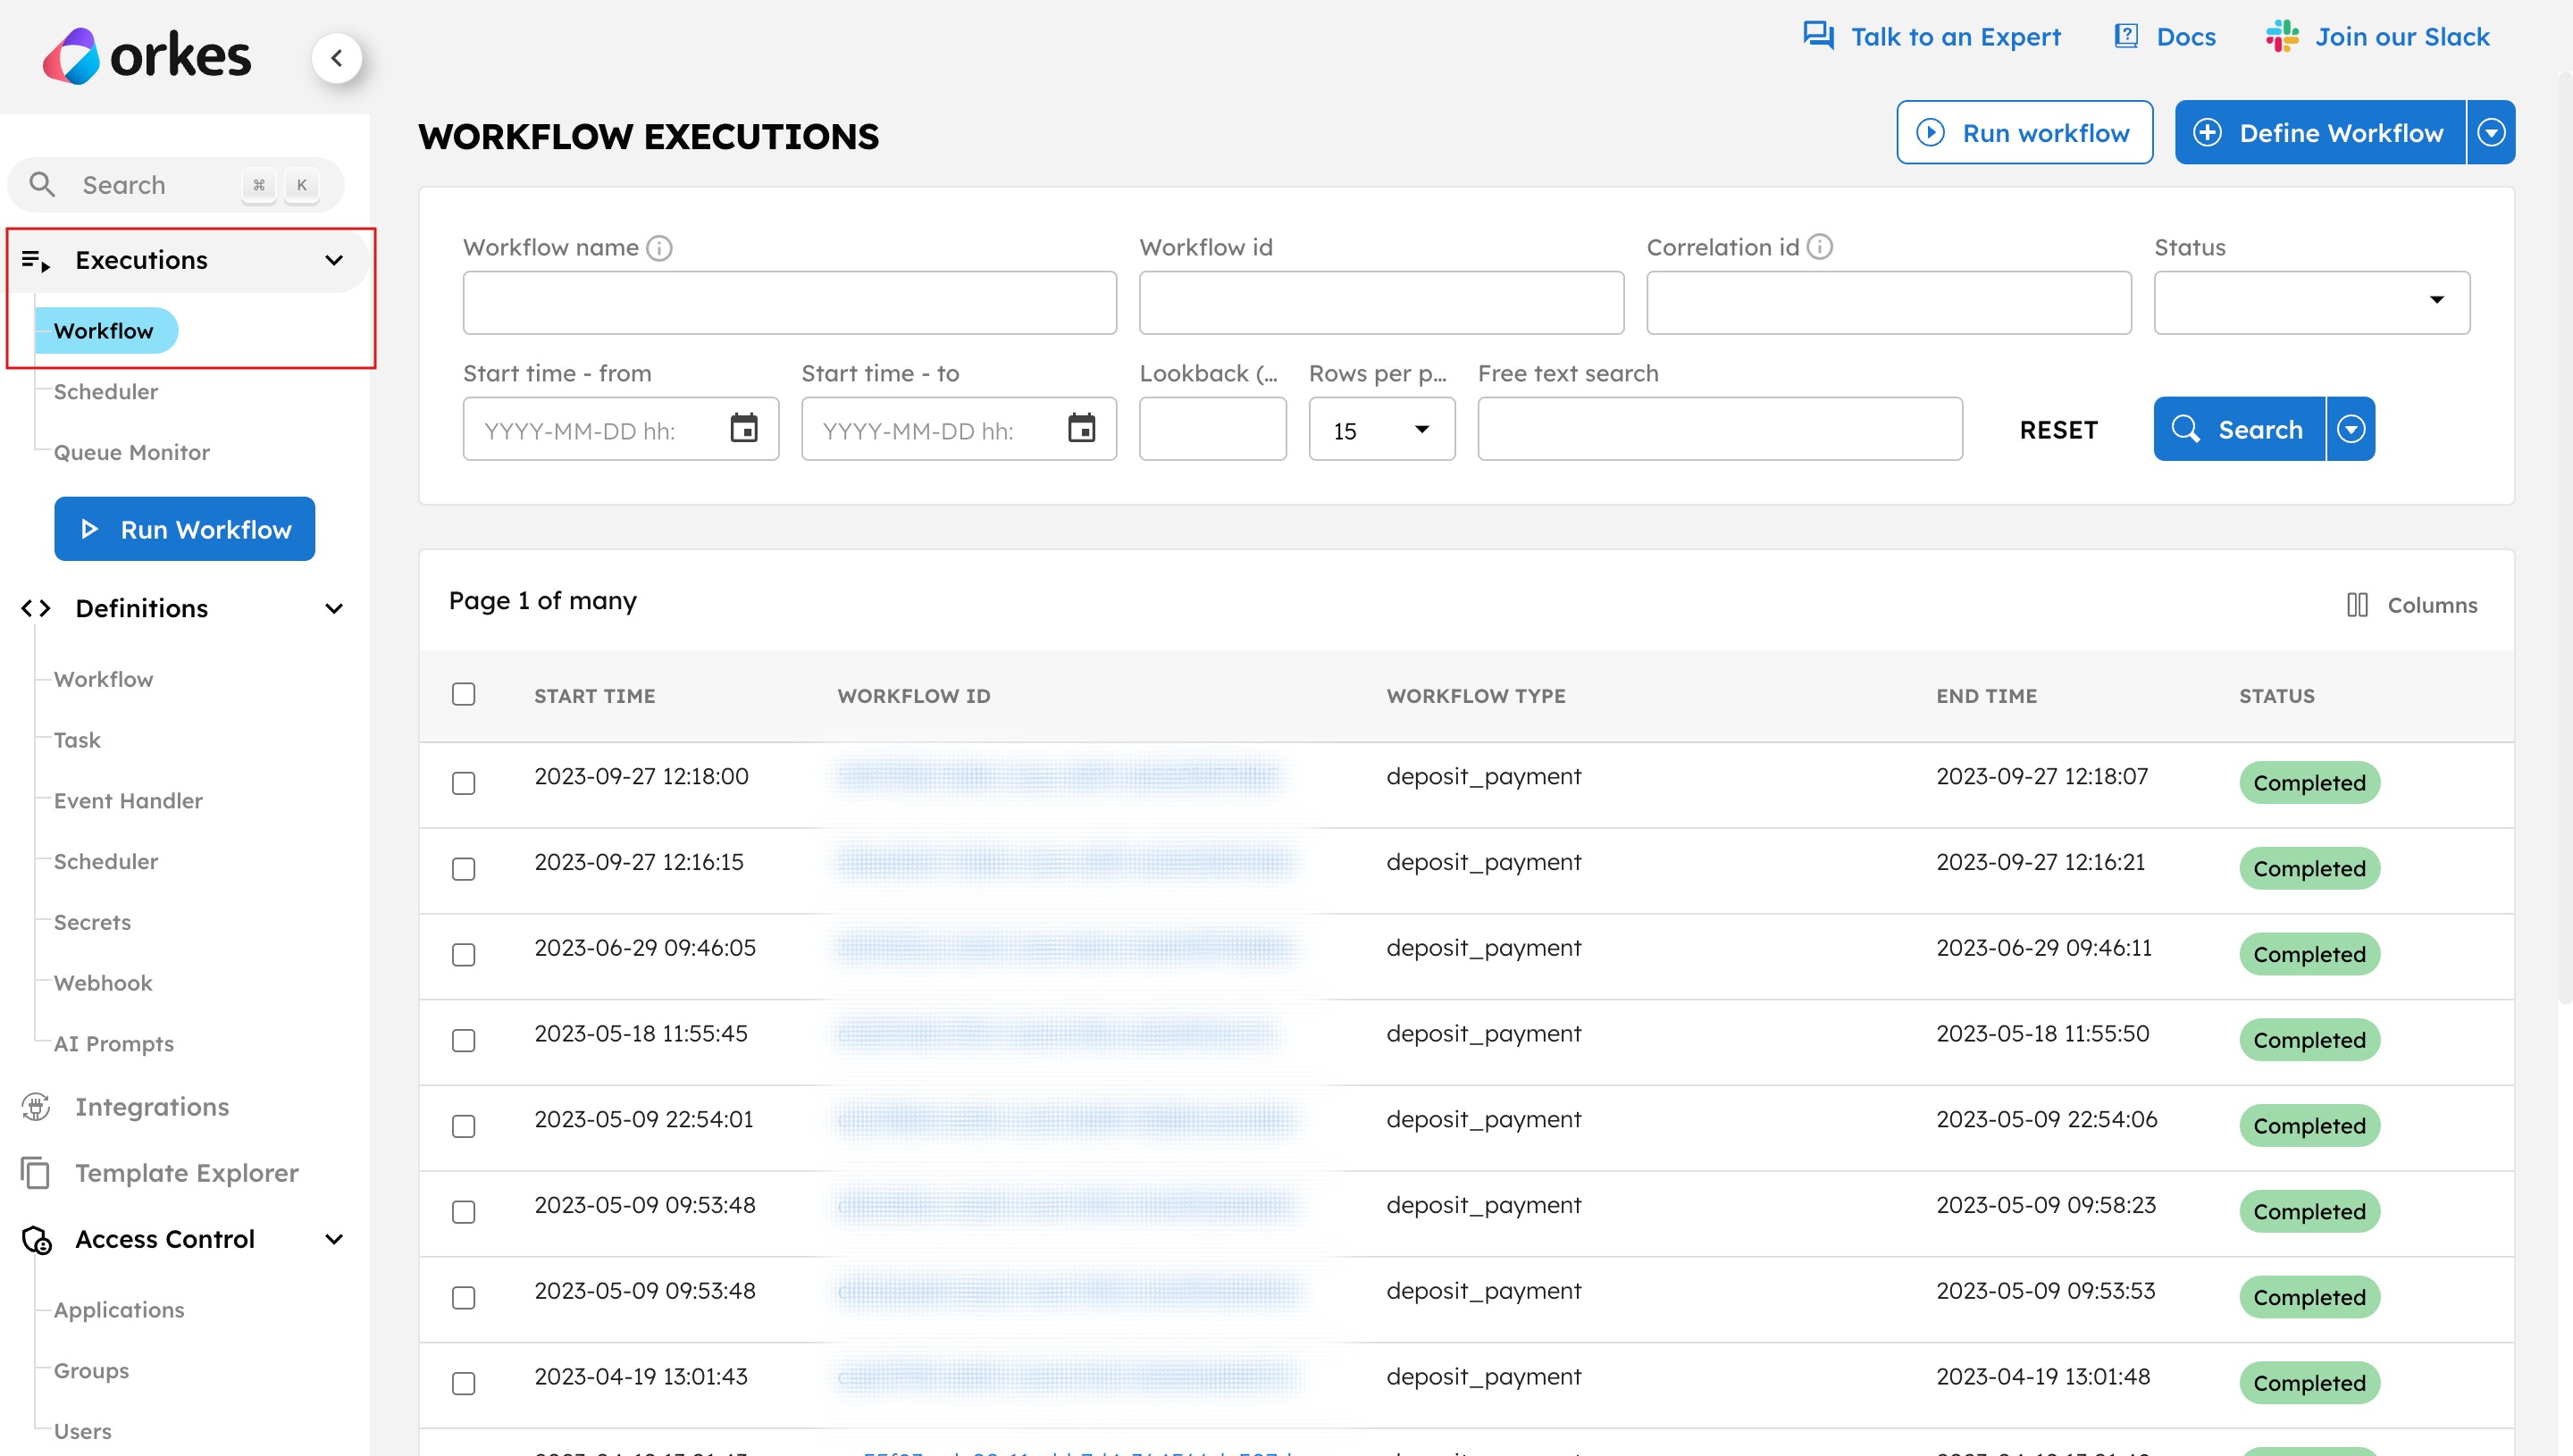 Workflow Executions page